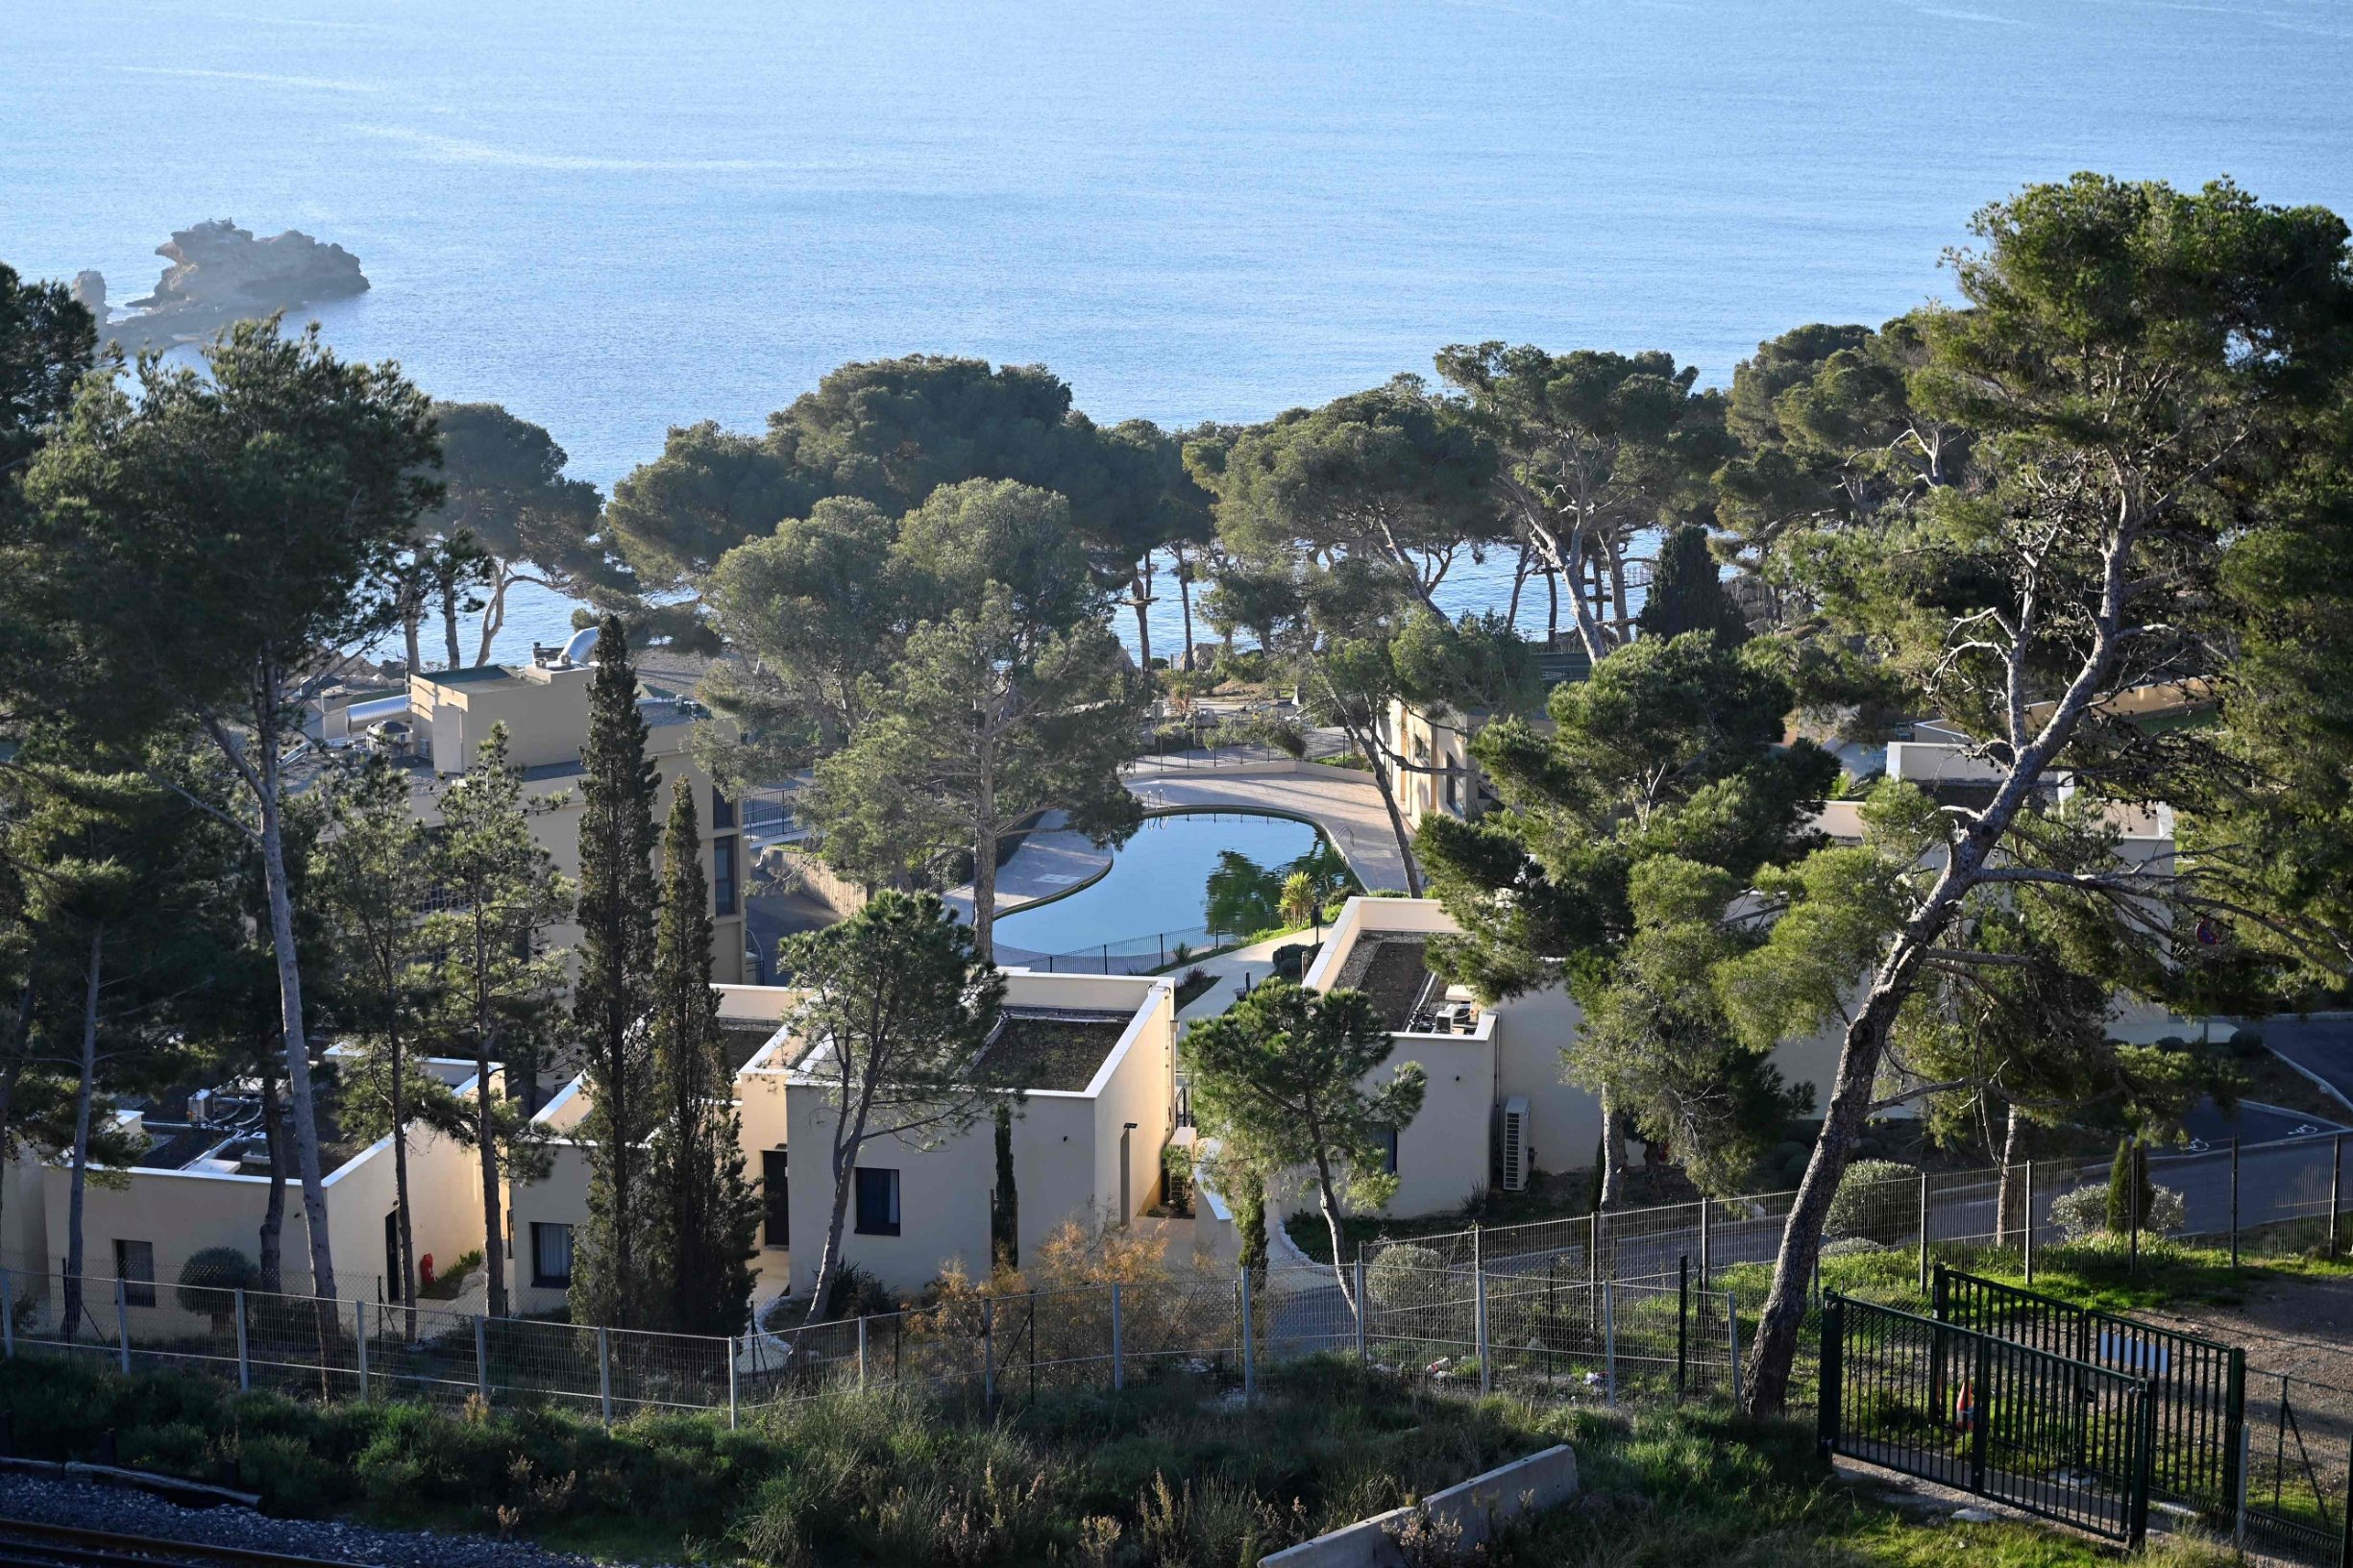 TOPSHOT - A picture taken on January 31, 2020 shows a general view of the Vacanciel holiday resort in Carry-le-Rouet, near Marseille, southern France, where French citizens, who are repatriated by plane from the coronavirus hot zone in Wuhan in China, are planned to be put under quarantine for 14 days. - A plane carrying around 200 French citizens flew out of virus-hit Wuhan on January 31. (Photo by GERARD JULIEN / AFP)